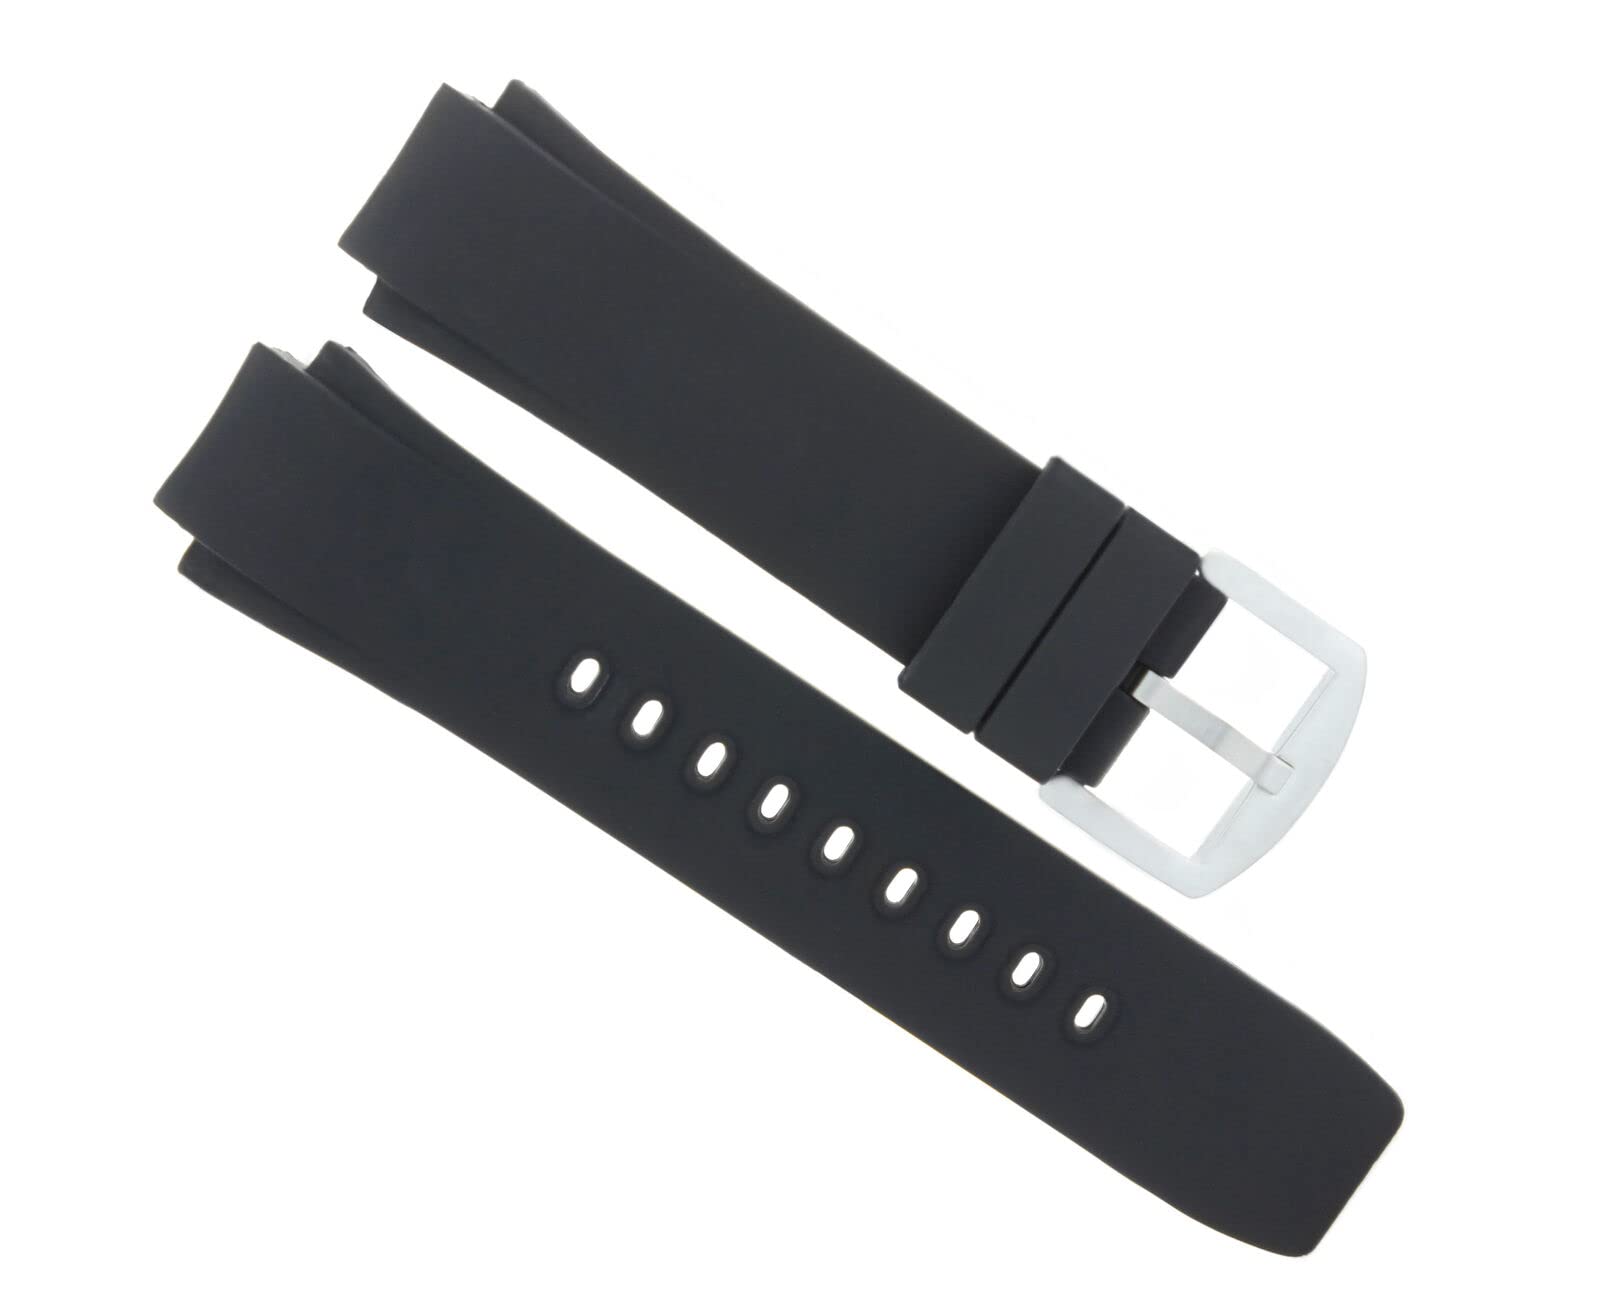 Ewatchparts SILICON RUBBER BAND STRAP FOR IWC 35380 353804 DUAL CROWN AQUATIMER BLACK